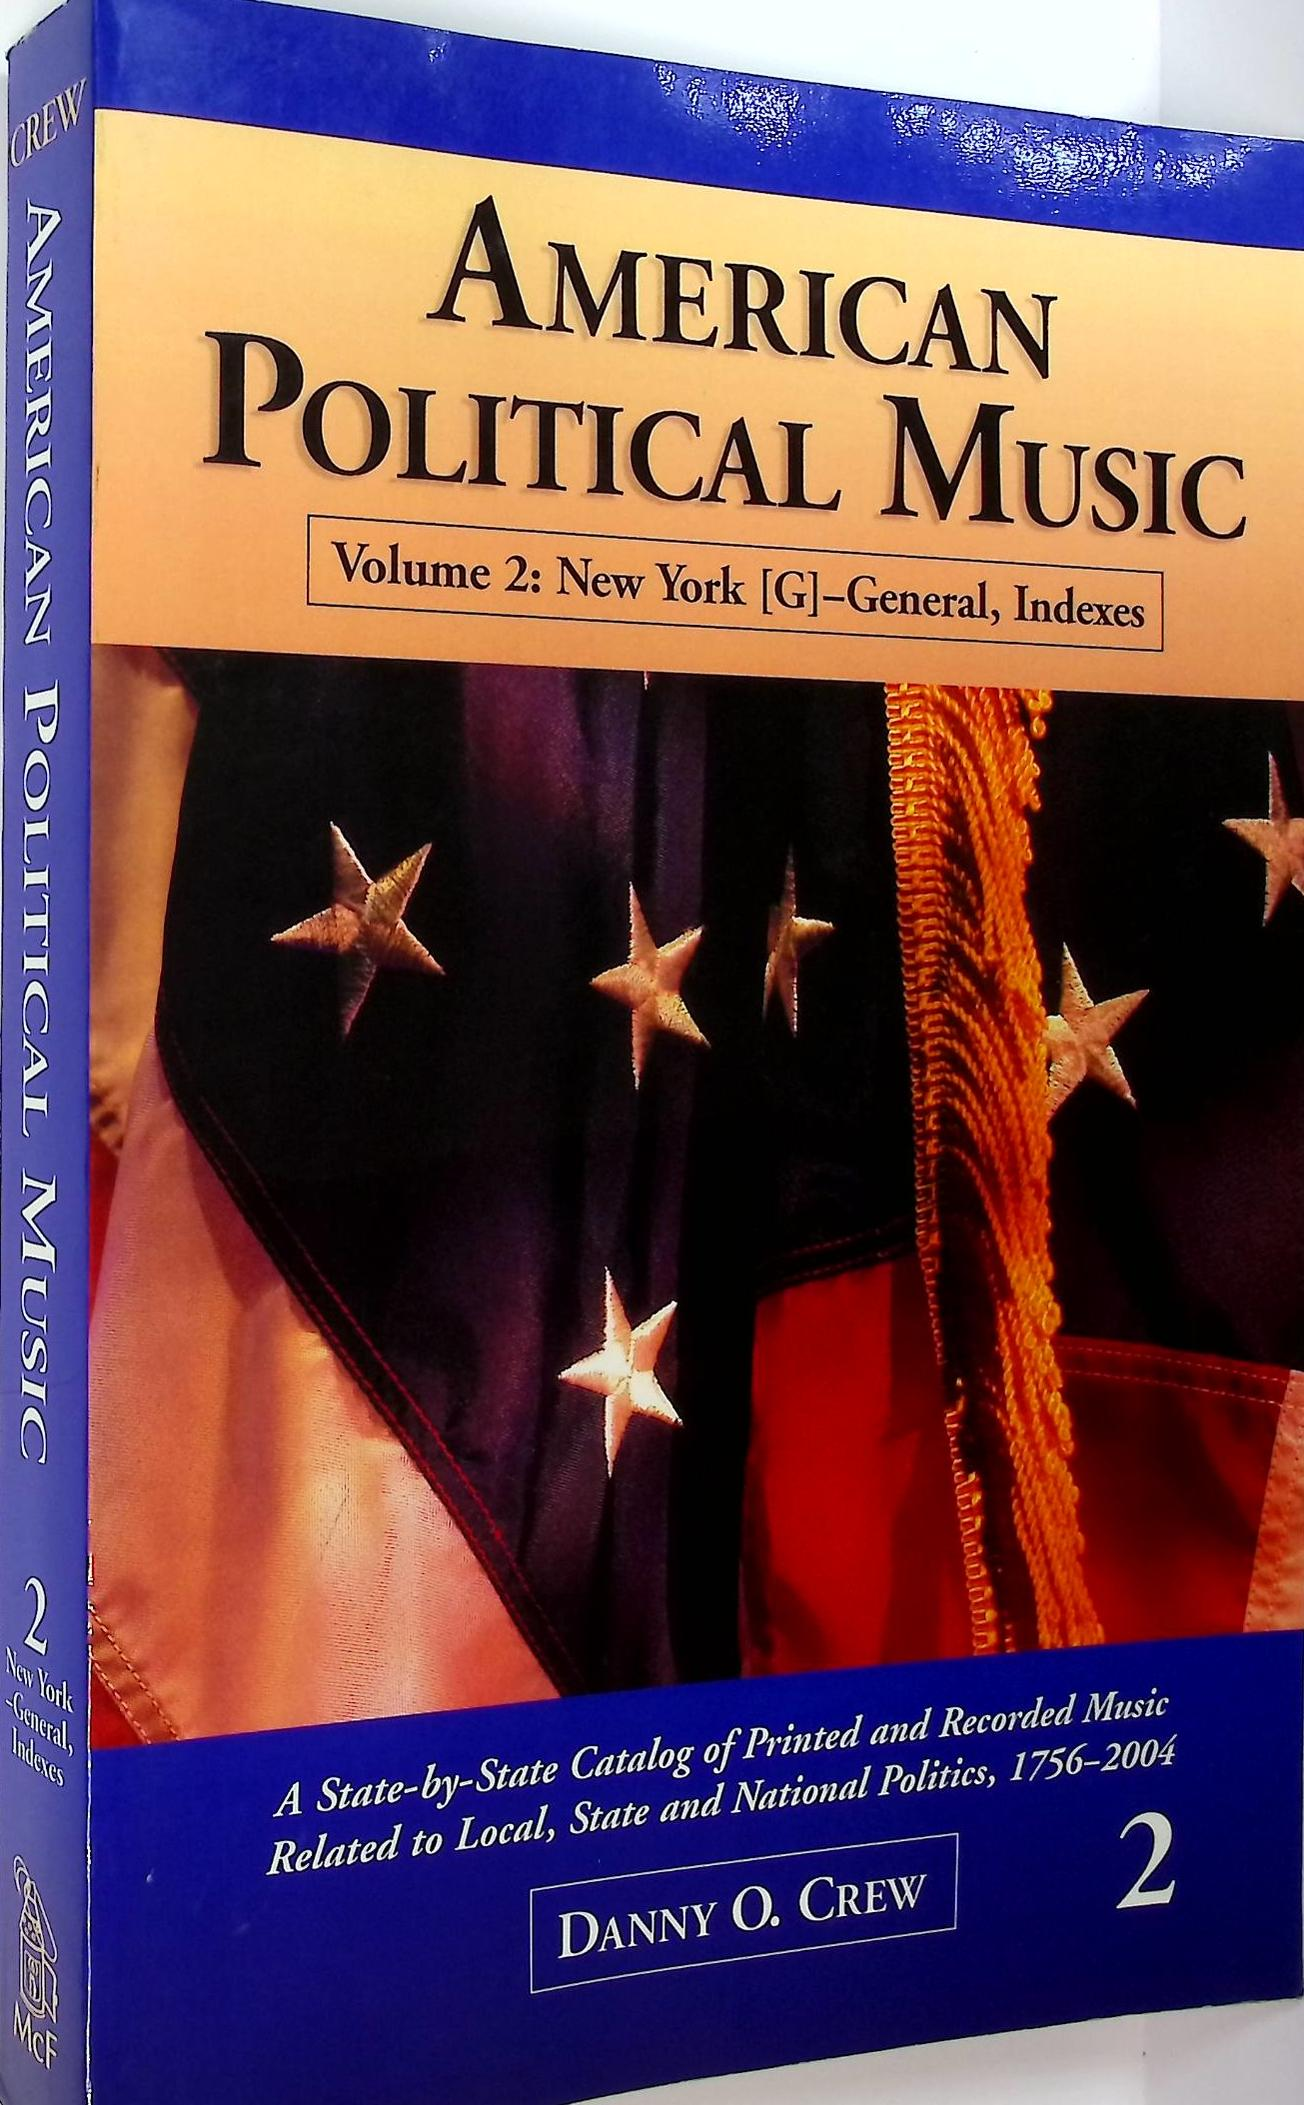 American Political Music. A State by State Catalog of Printed and Recorded Music Related to State, Local and National Politics 1756 - 2004. Volume 2.